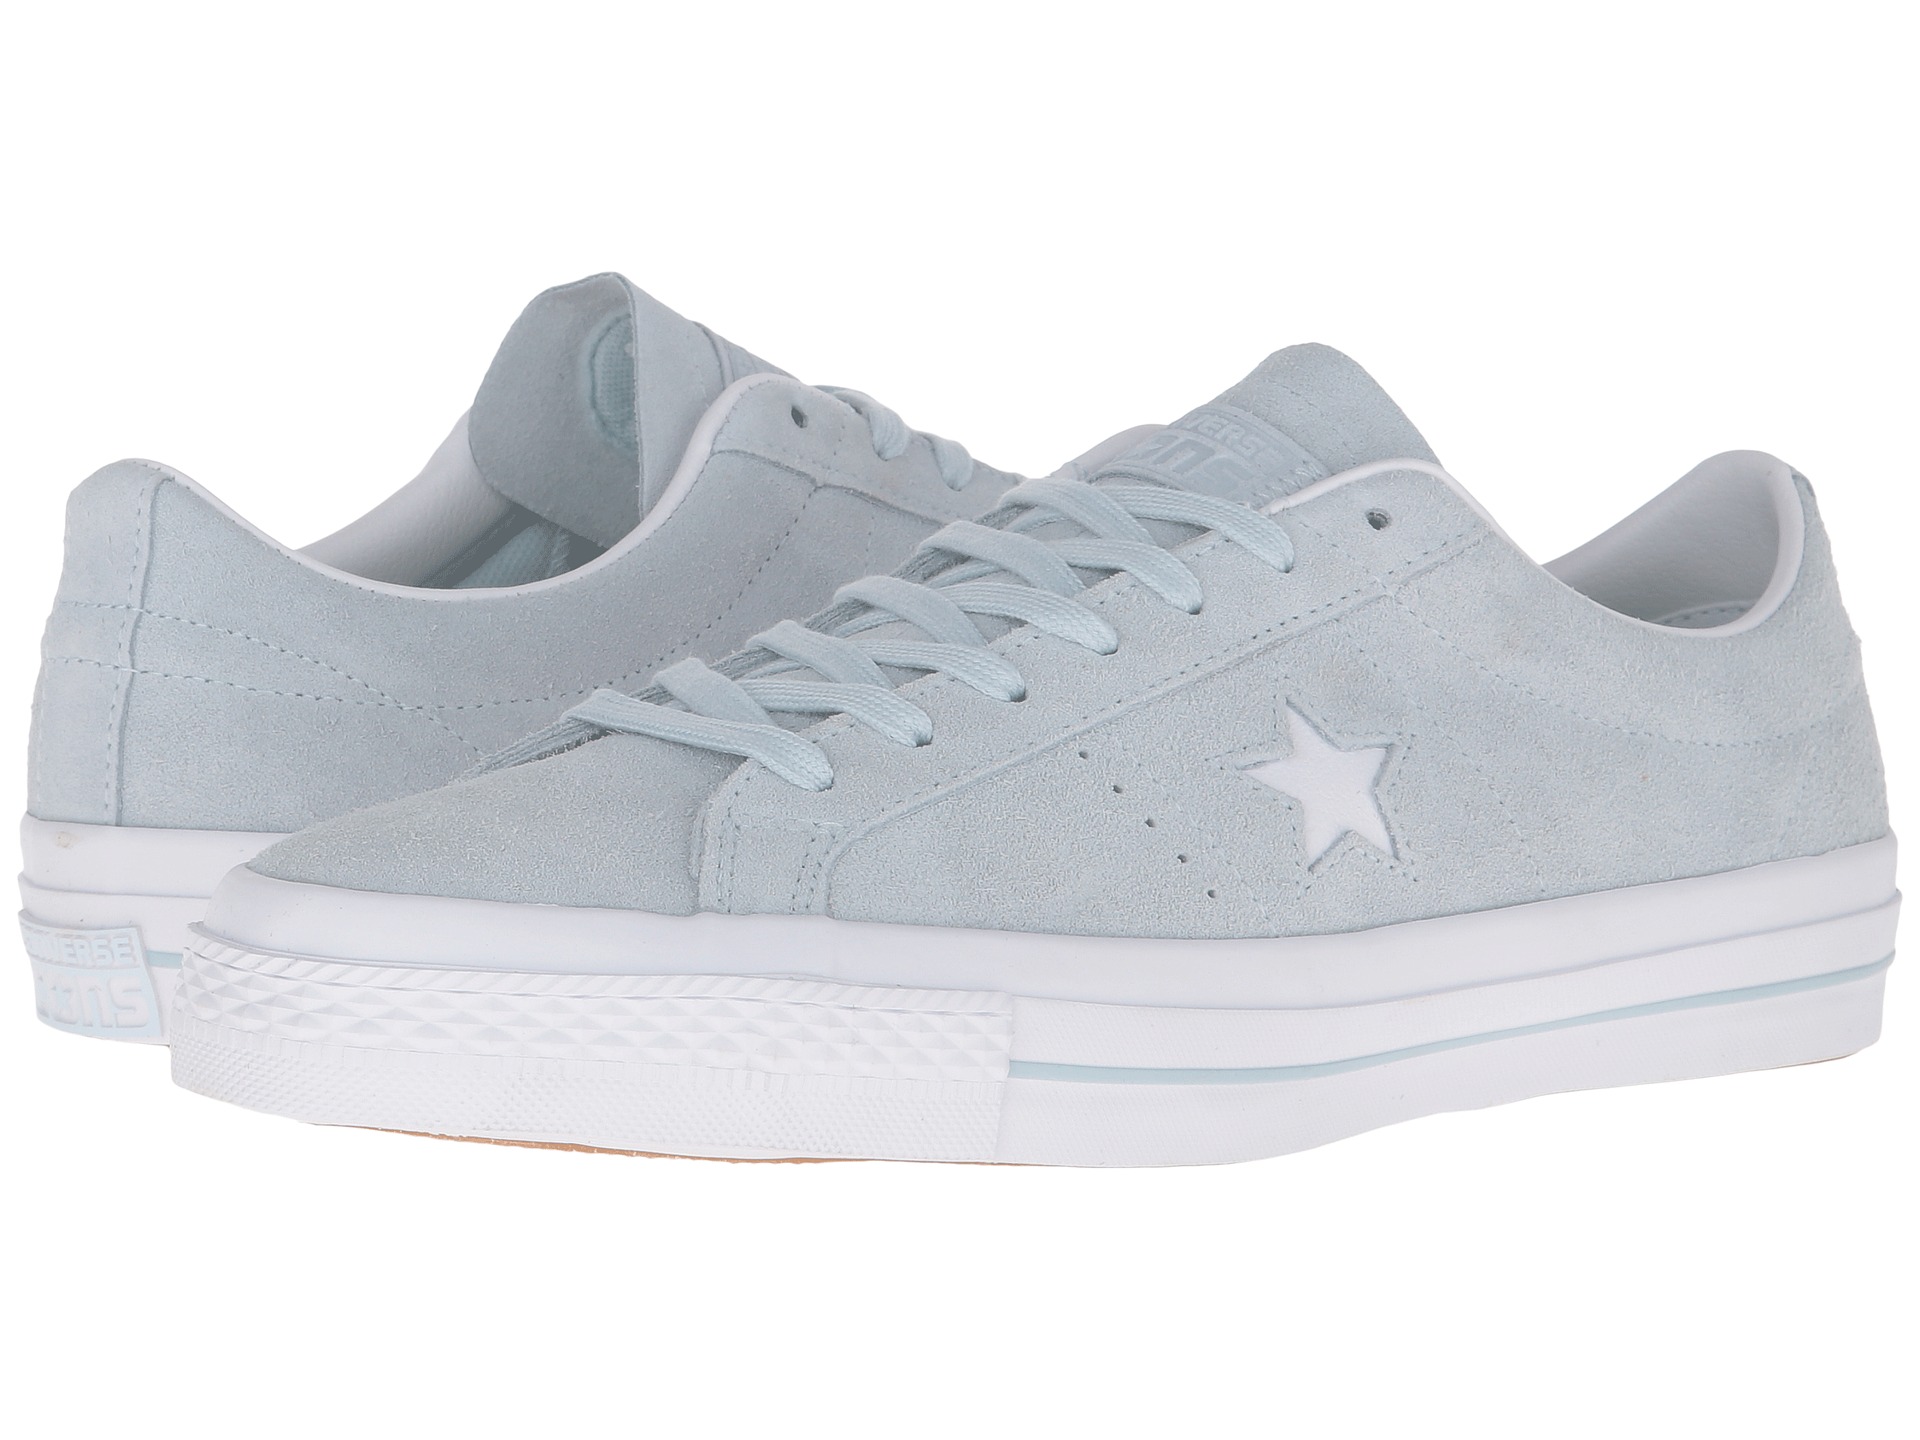 Converse One Star® Premium Suede Ox - Zappos.com Free Shipping BOTH Ways